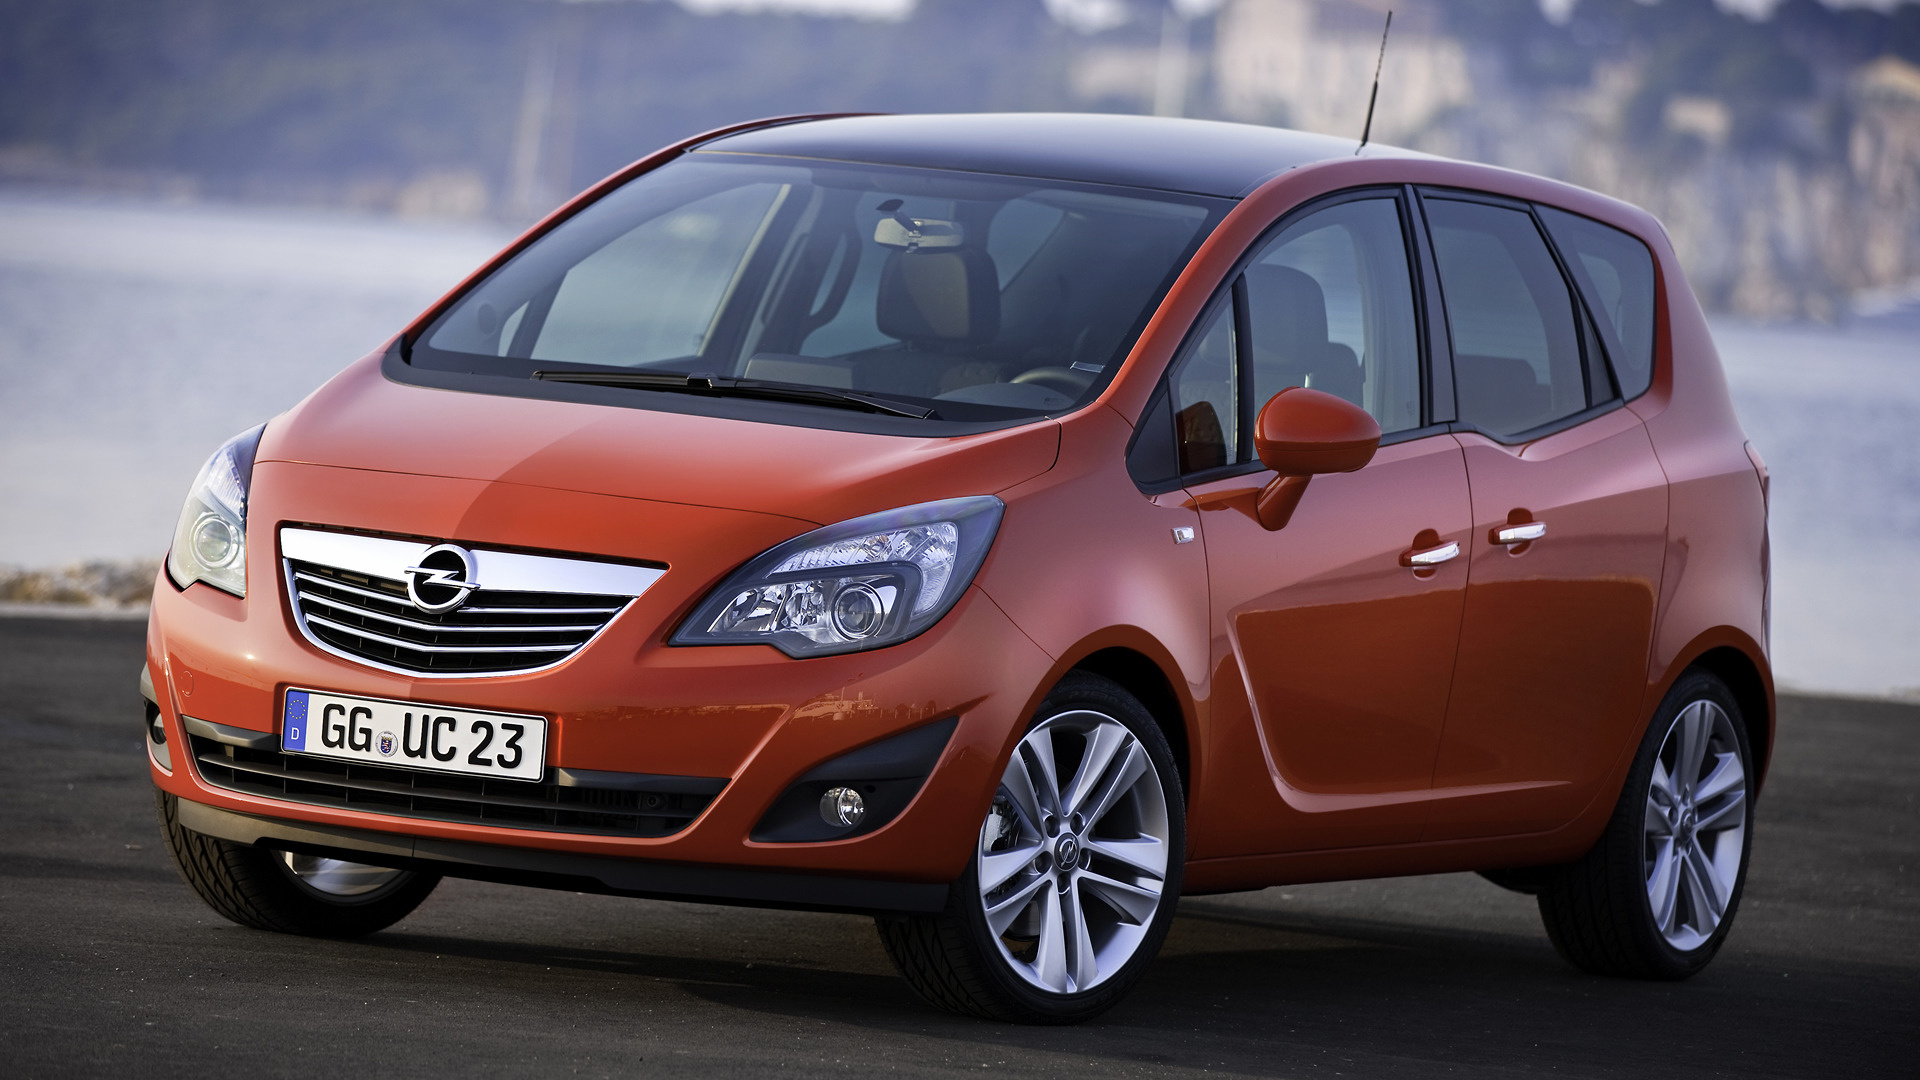 2010 Opel Meriva - Wallpapers and HD Images